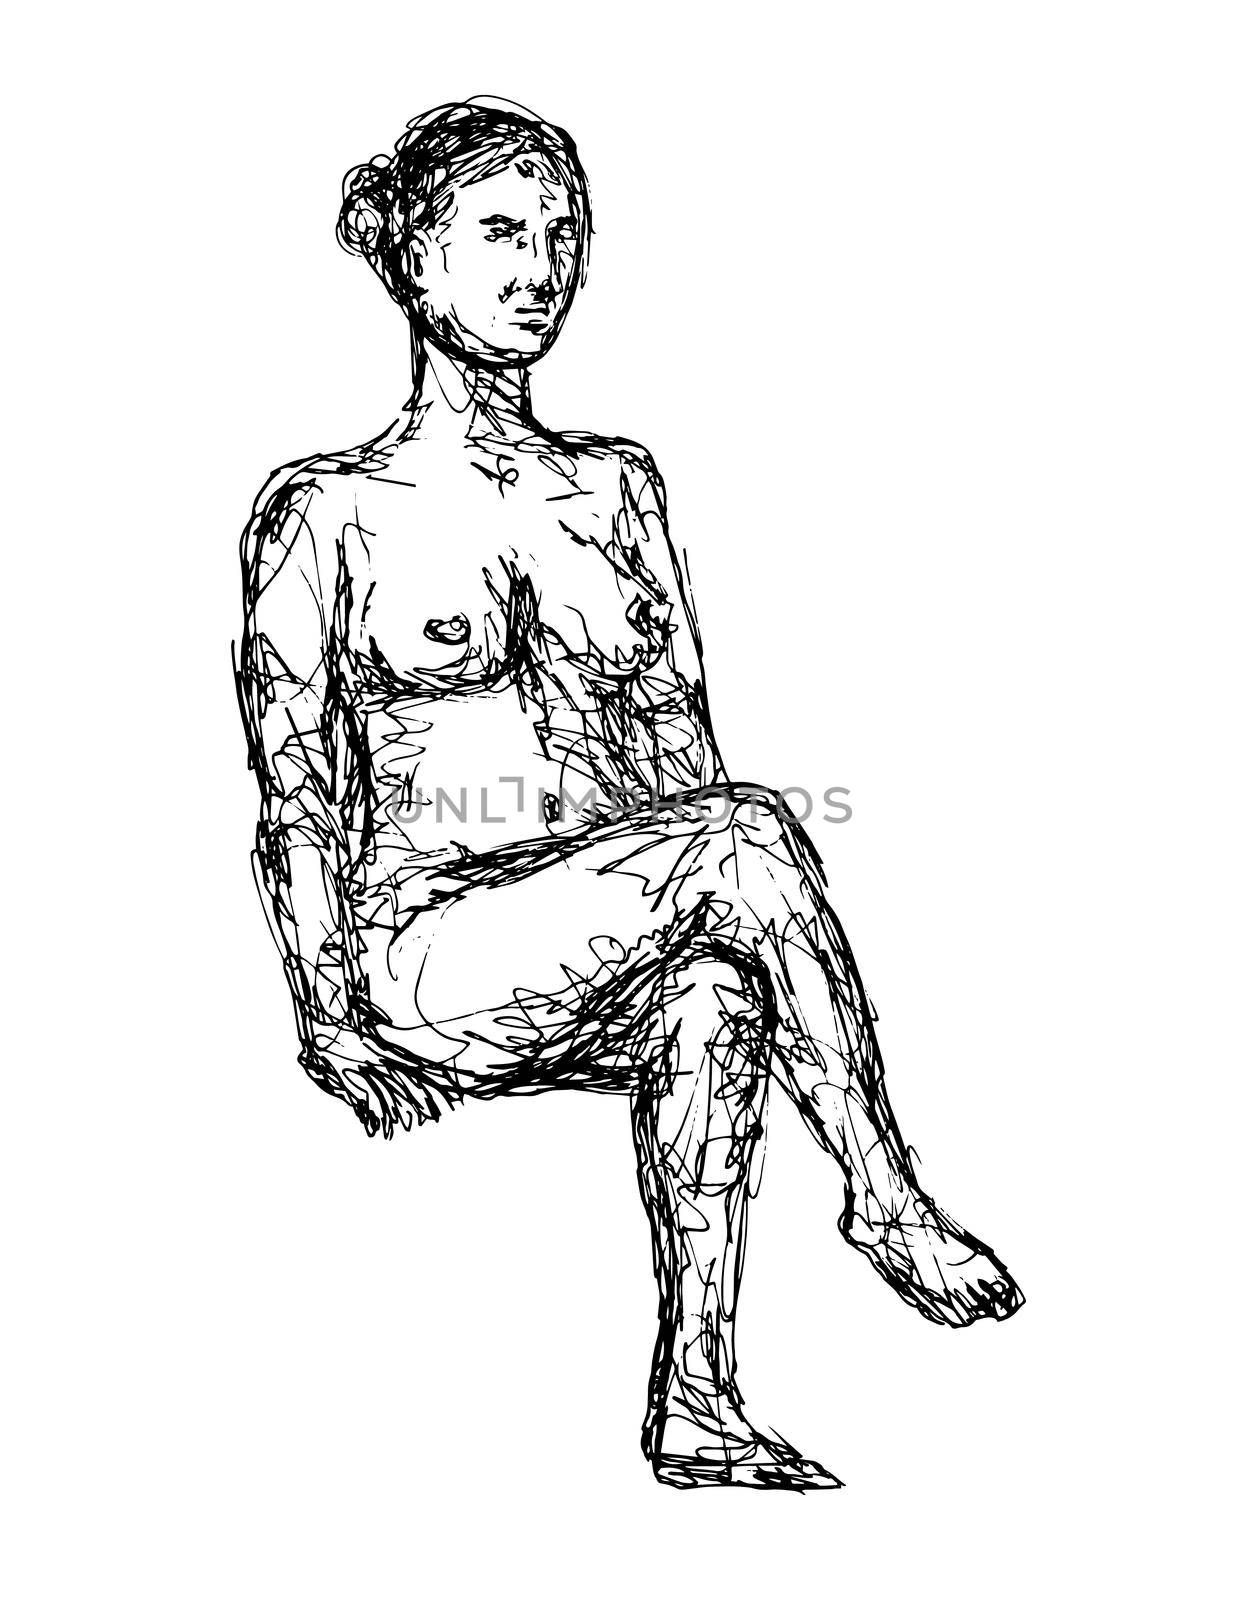 Doodle art illustration of a nude female human figure seated or sitting down viewed from front done in continuous line drawing style in black and white on isolated background.